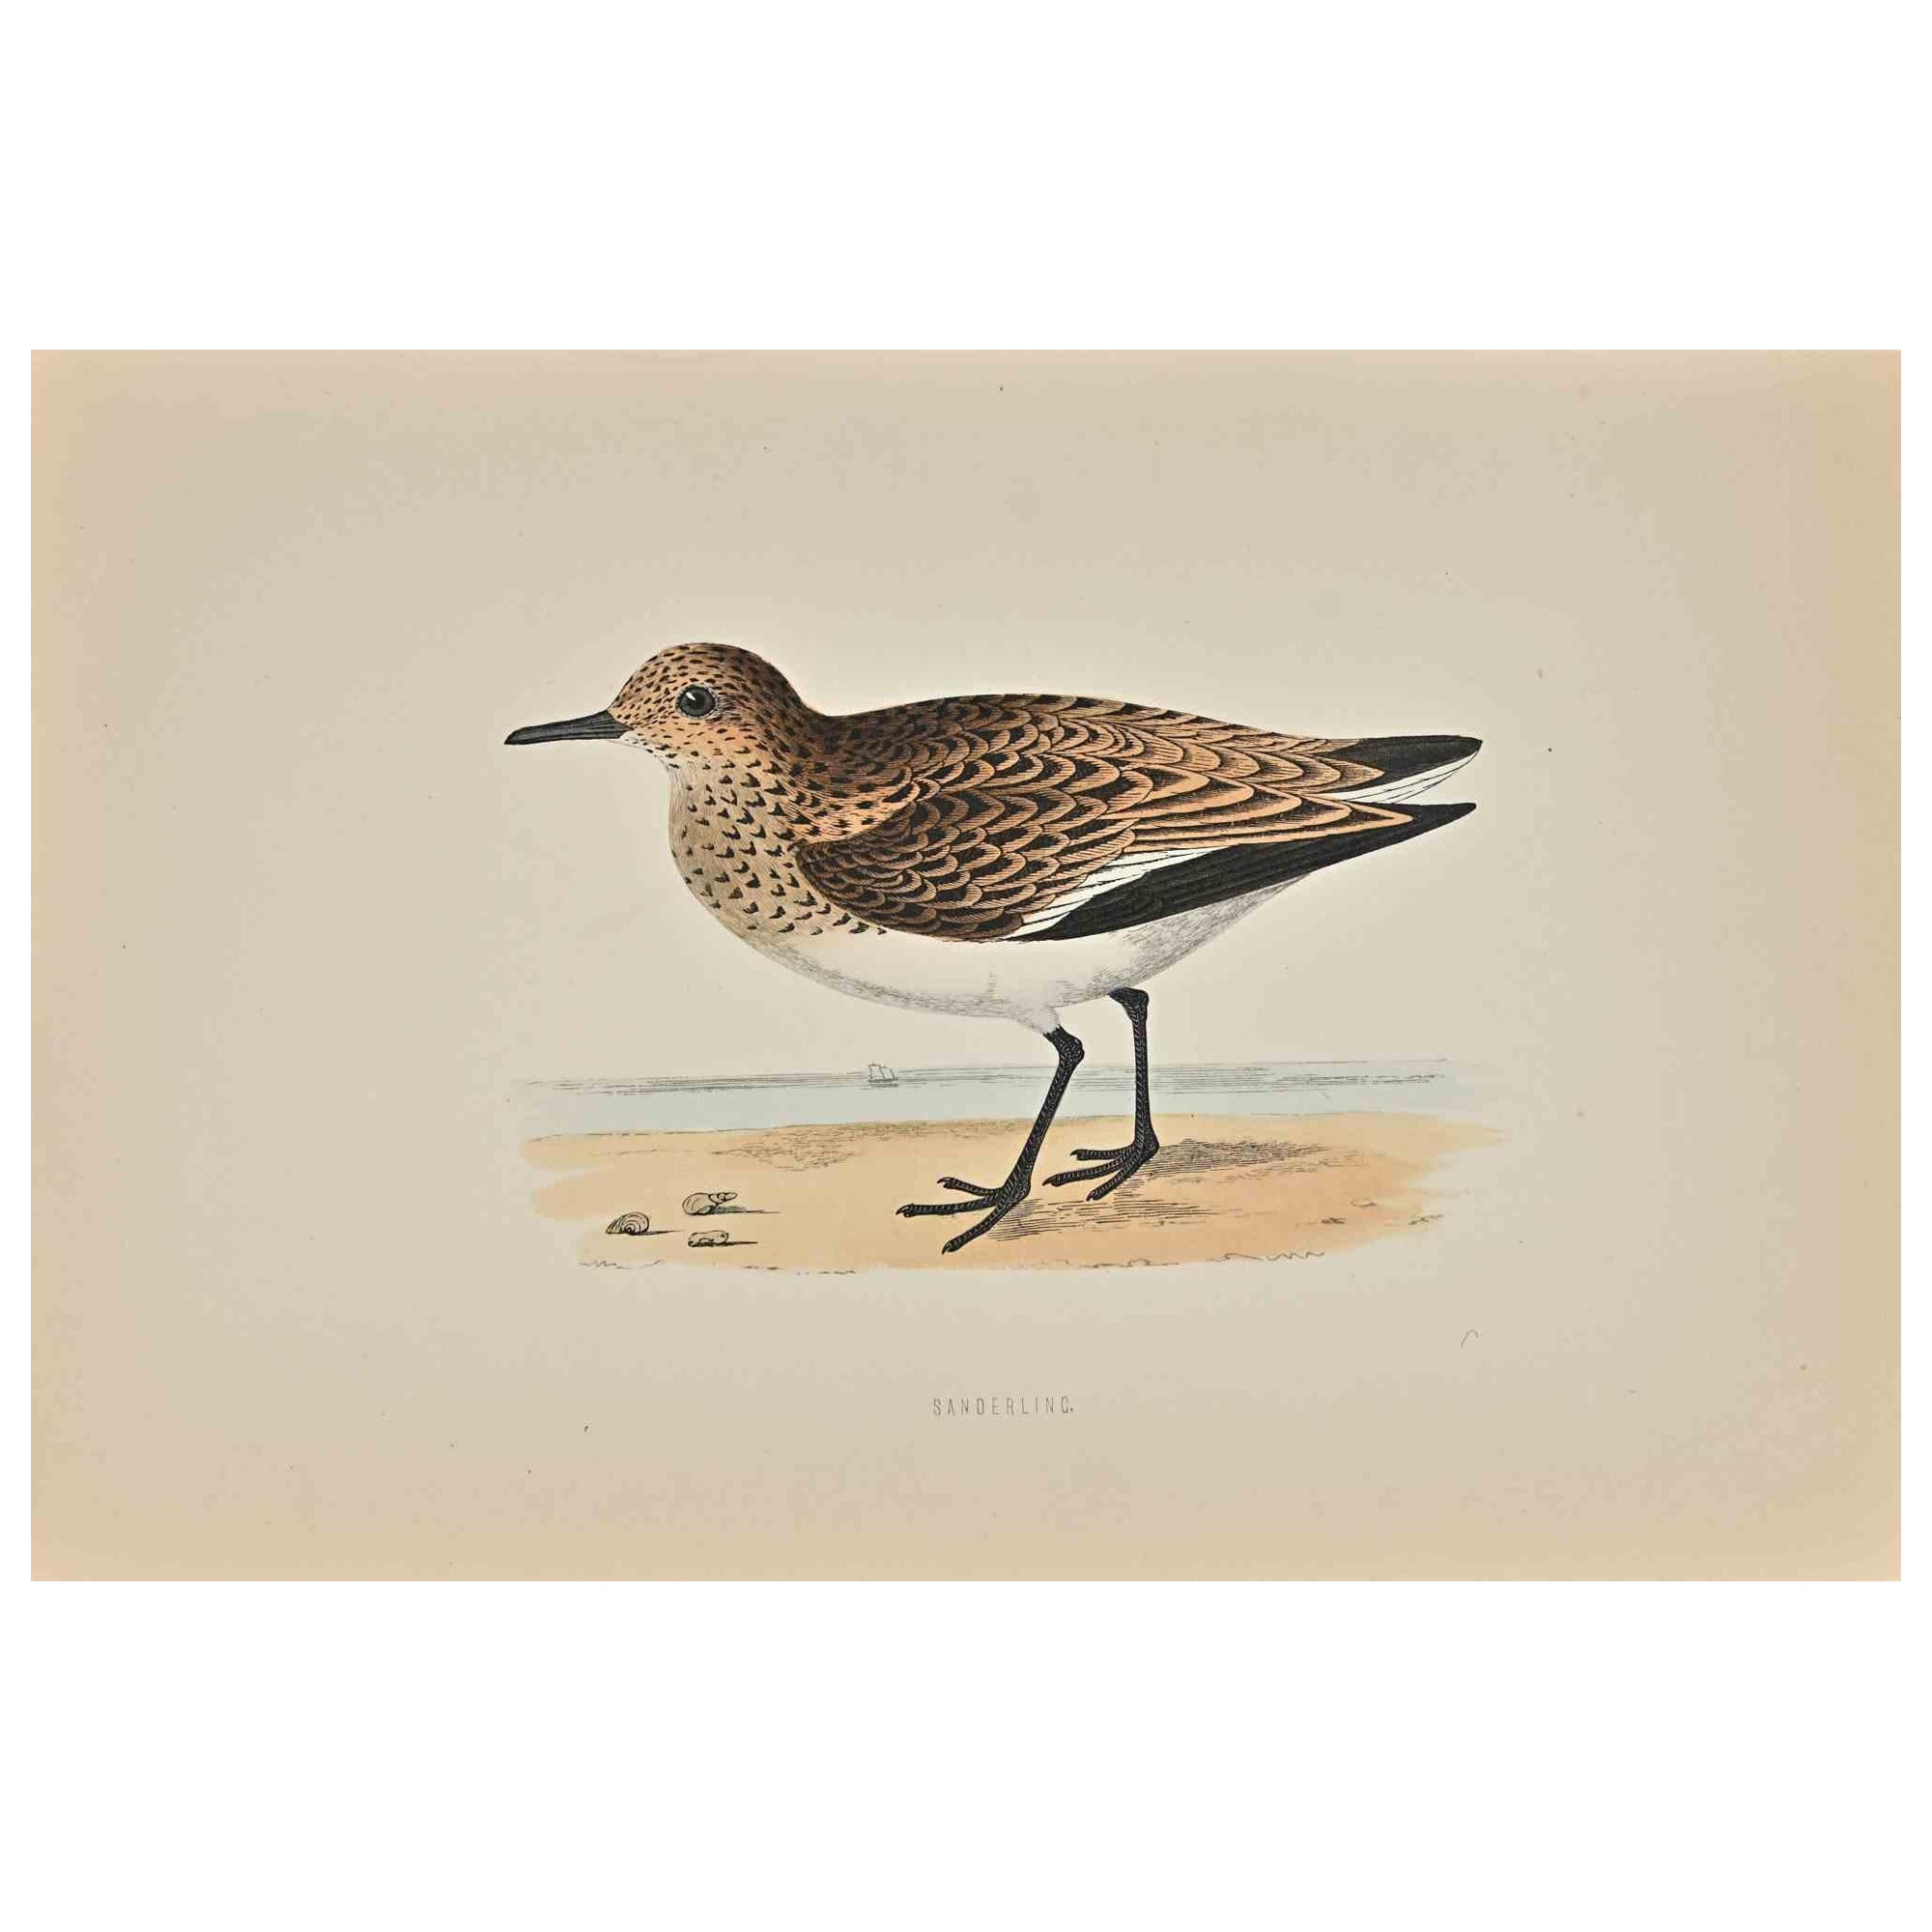 Sanderling is a modern artwork realized in 1870 by the British artist Alexander Francis Lydon (1836-1917).

Woodcut print on ivory-colored paper.

Hand-colored, published by London, Bell & Sons, 1870.  

The name of the bird is printed on the plate.